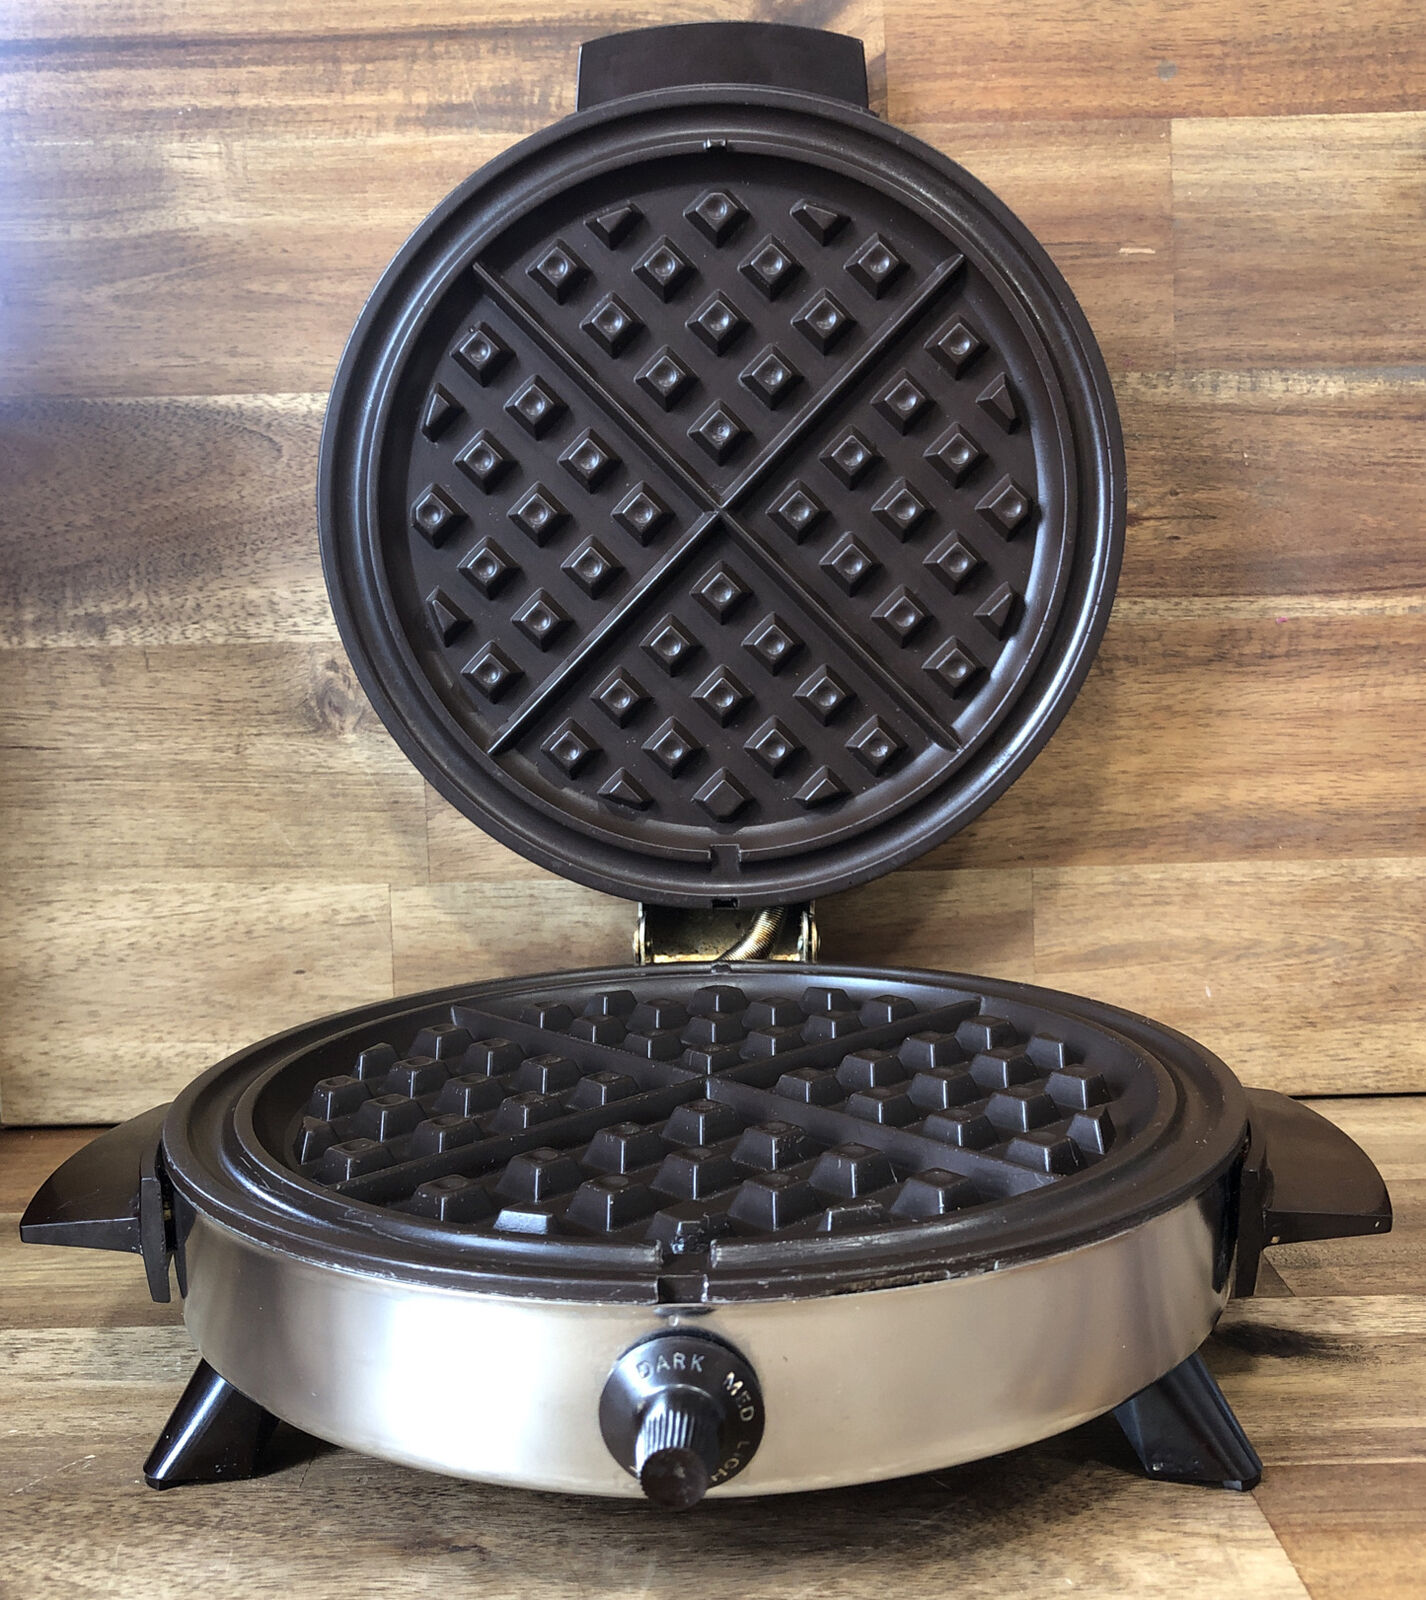 Waffle Maker Sears Counter Craft Round Chrome 7″ Model 303647600 Vintage Works